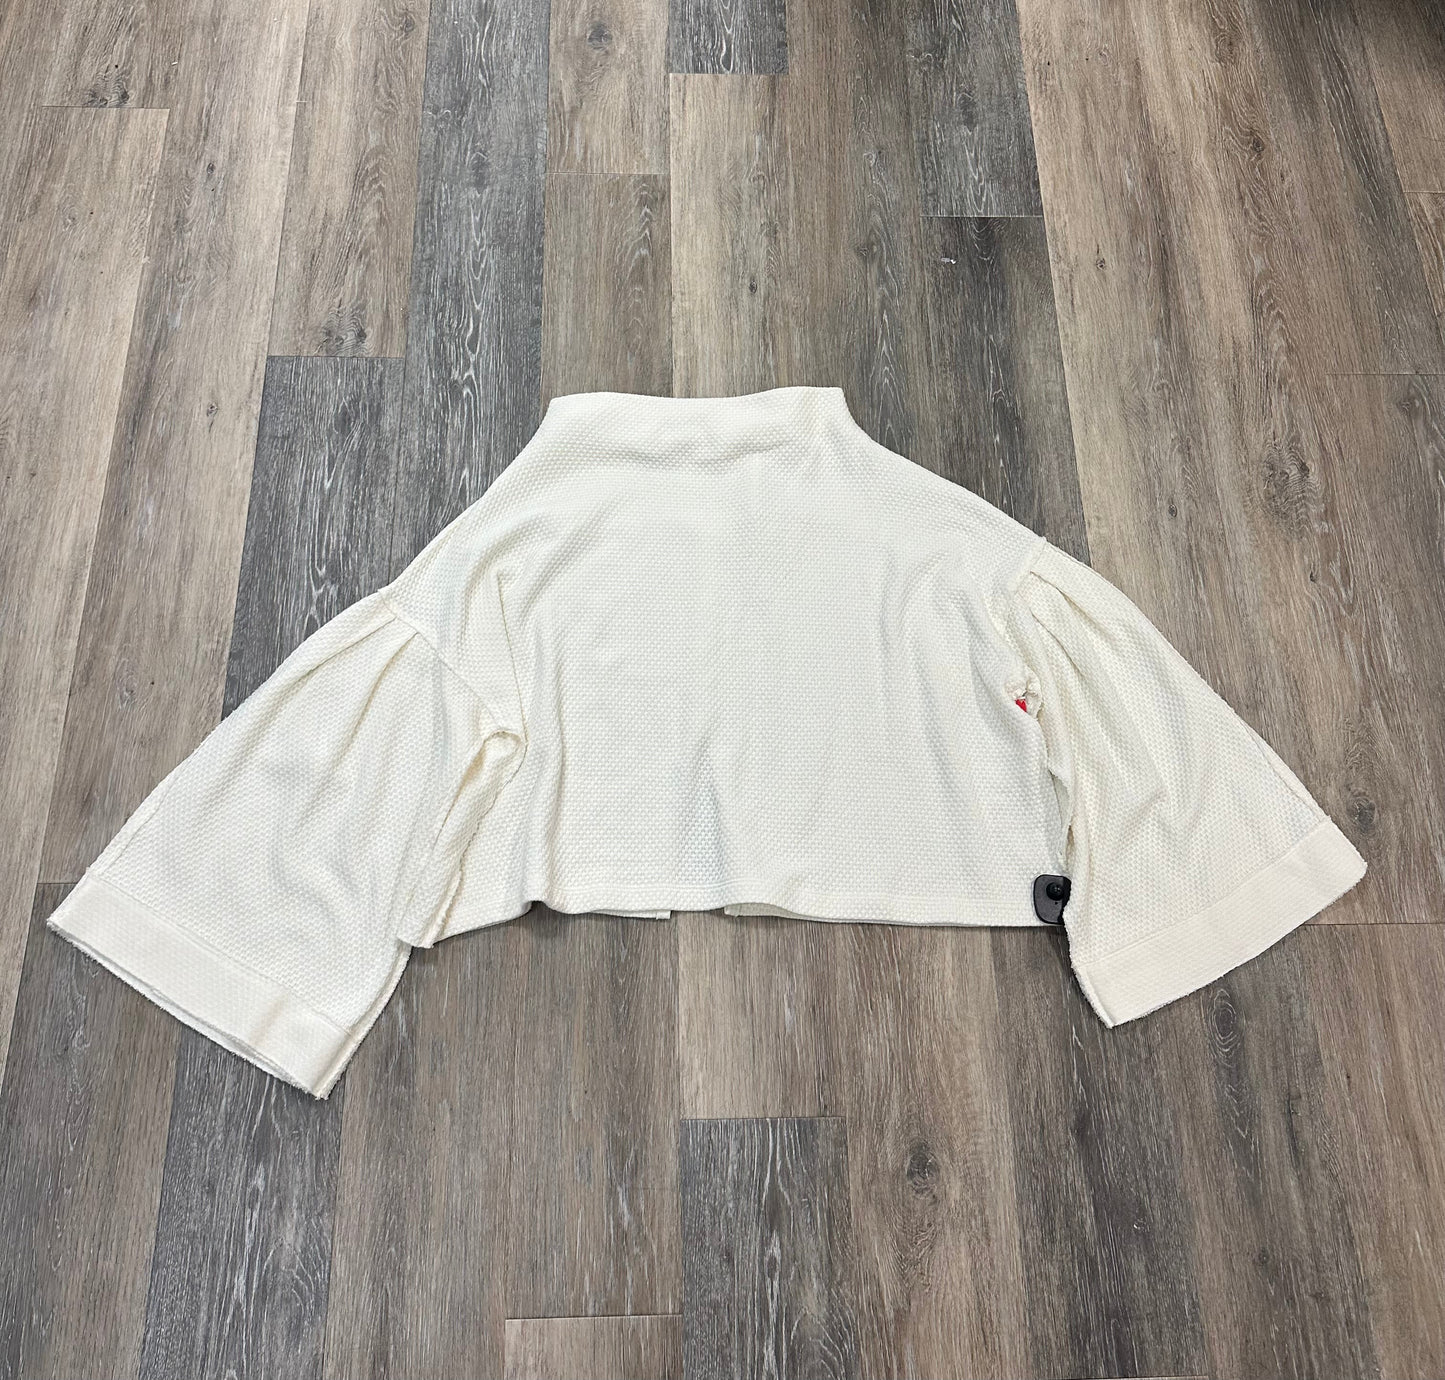 Cream Top Long Sleeve We The Free, Size L